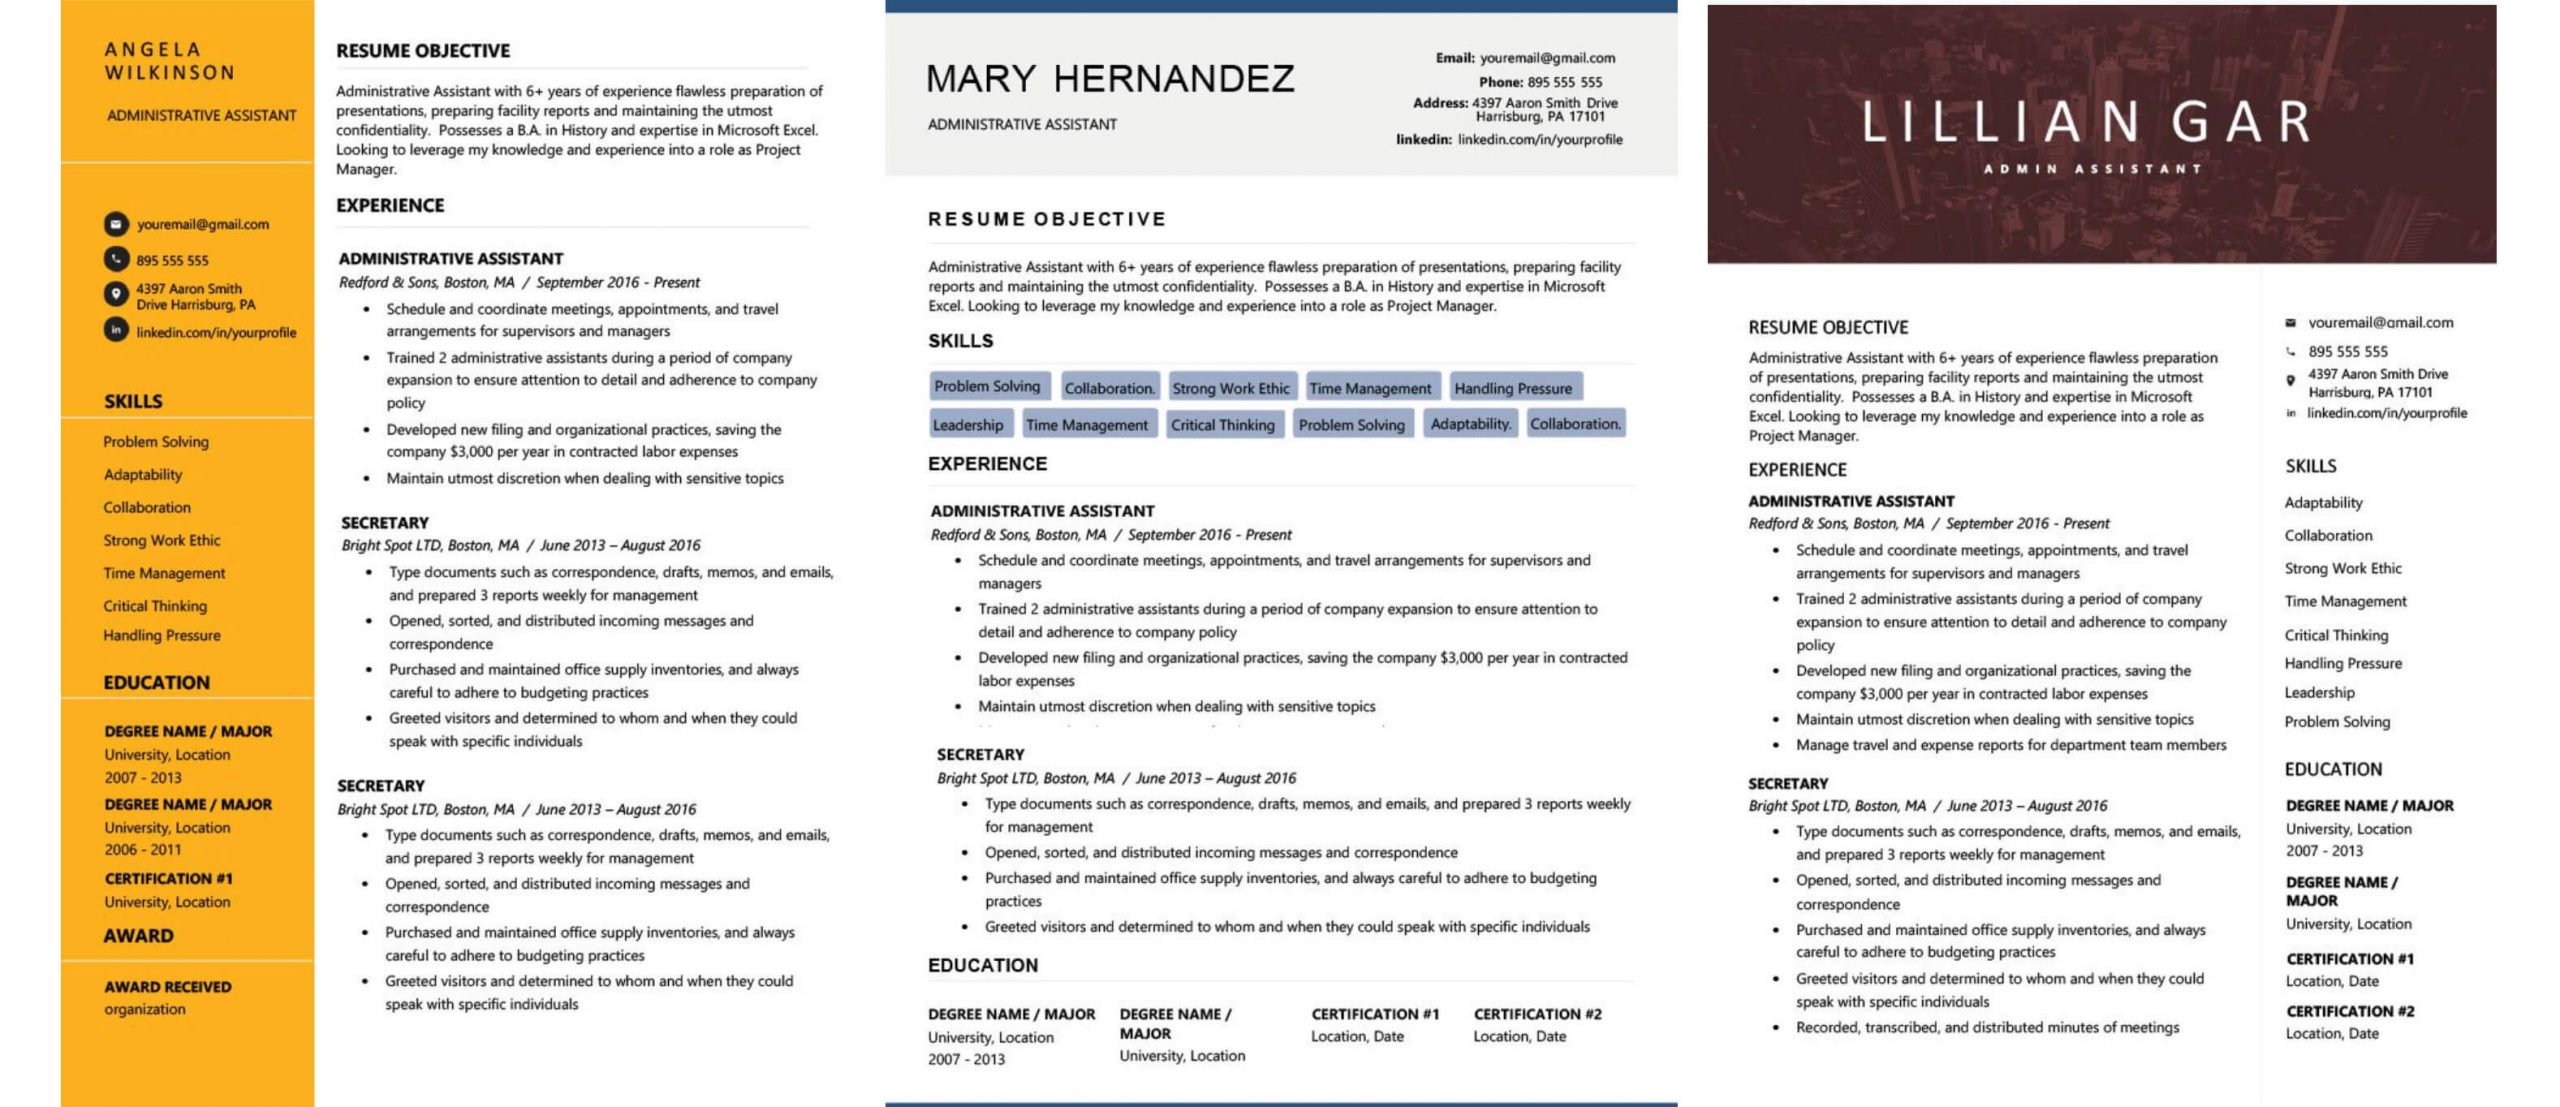 Data Science Dream Job Resume Template How to Write A Great Data Science Resume â Dataquest